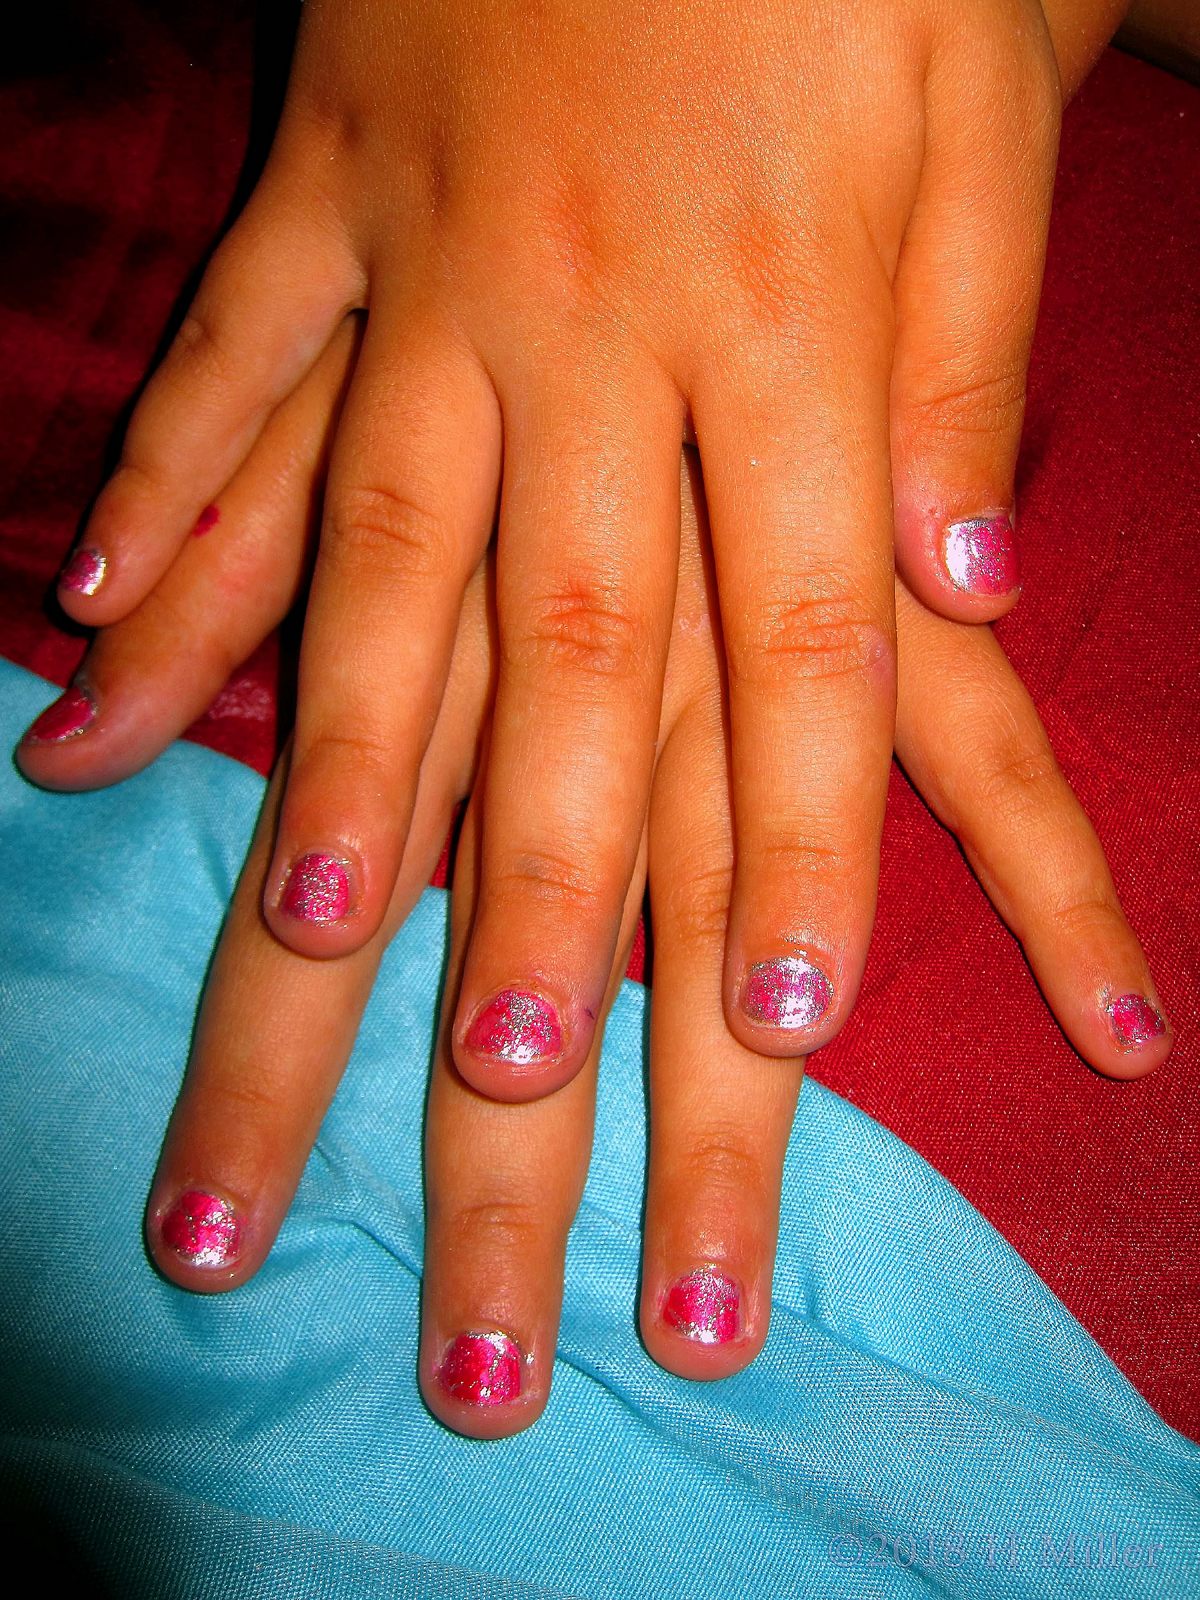 Solid Pink Base With Super Sparkly Glitter, Pretty Kids Manicure!